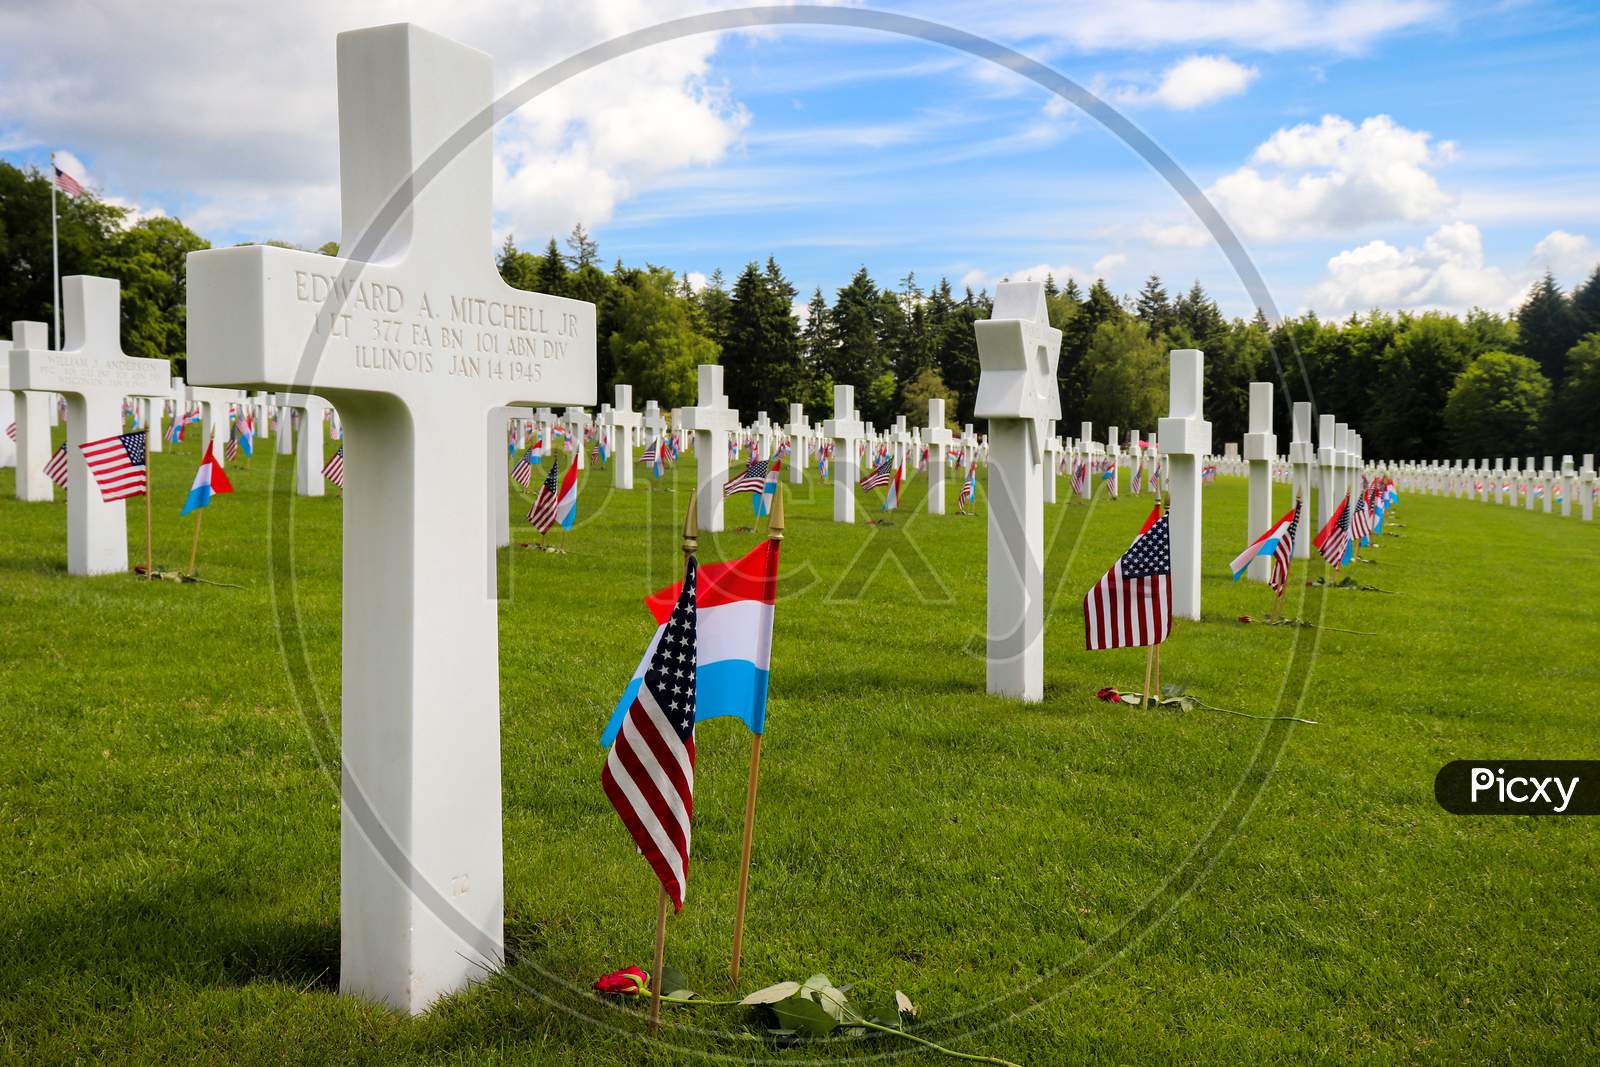 Headstones In A Row At A Military Cemetery.